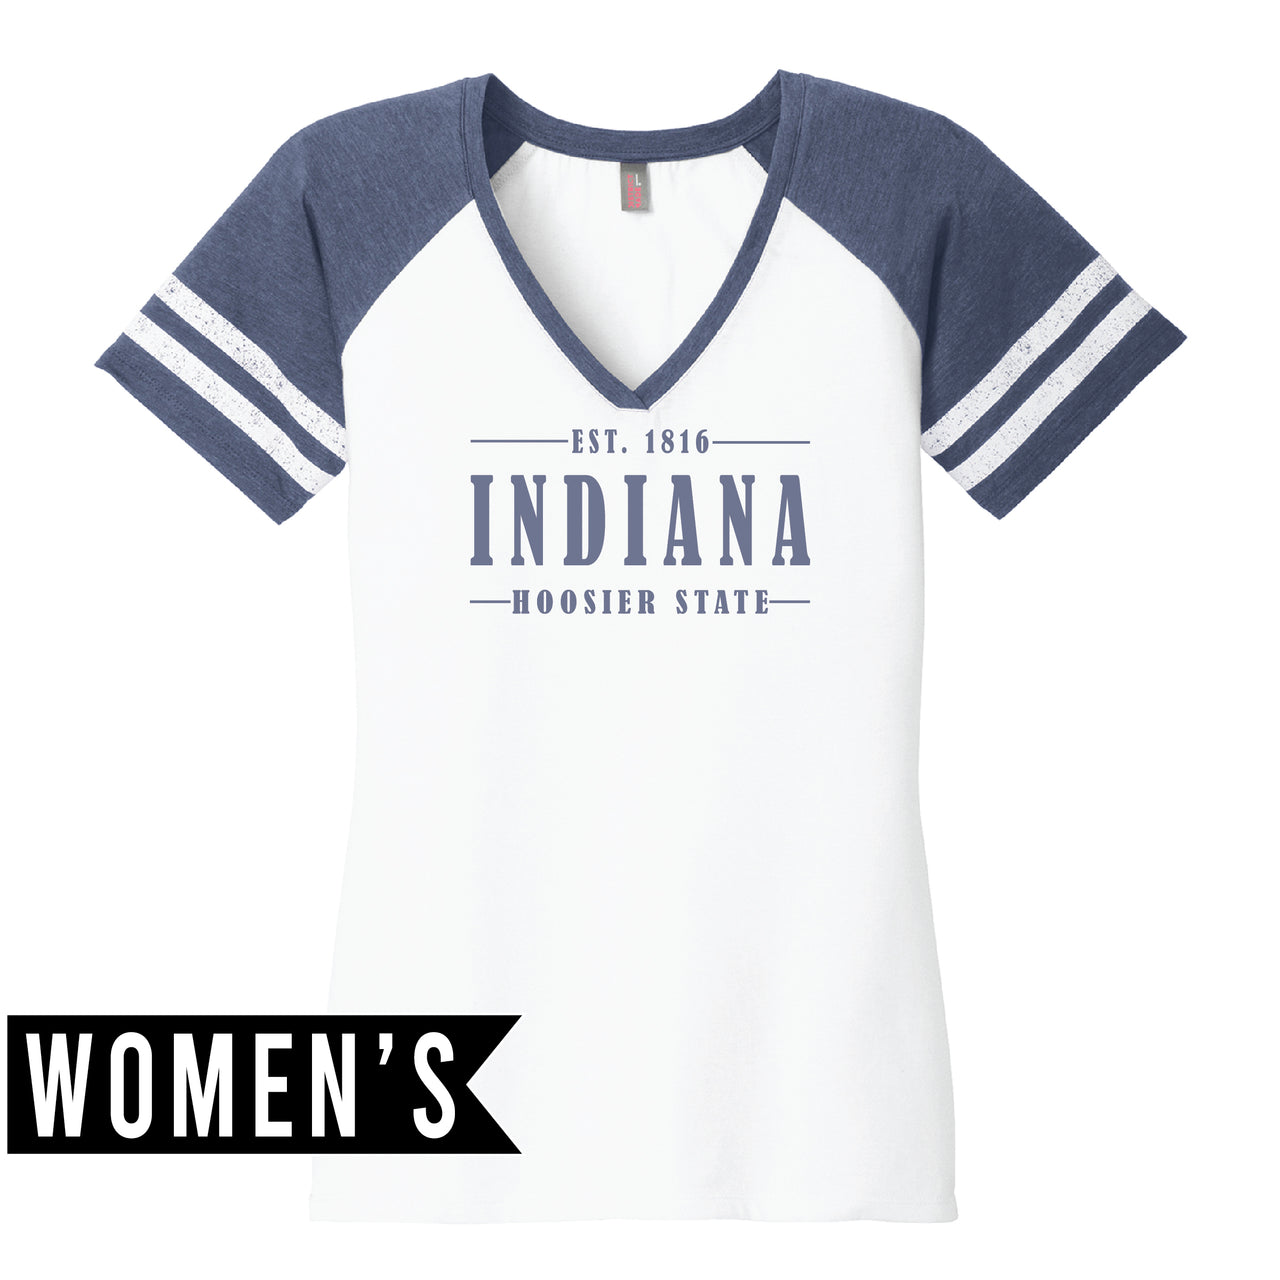 Women’s Game V-Neck Tee - Indiana 1816